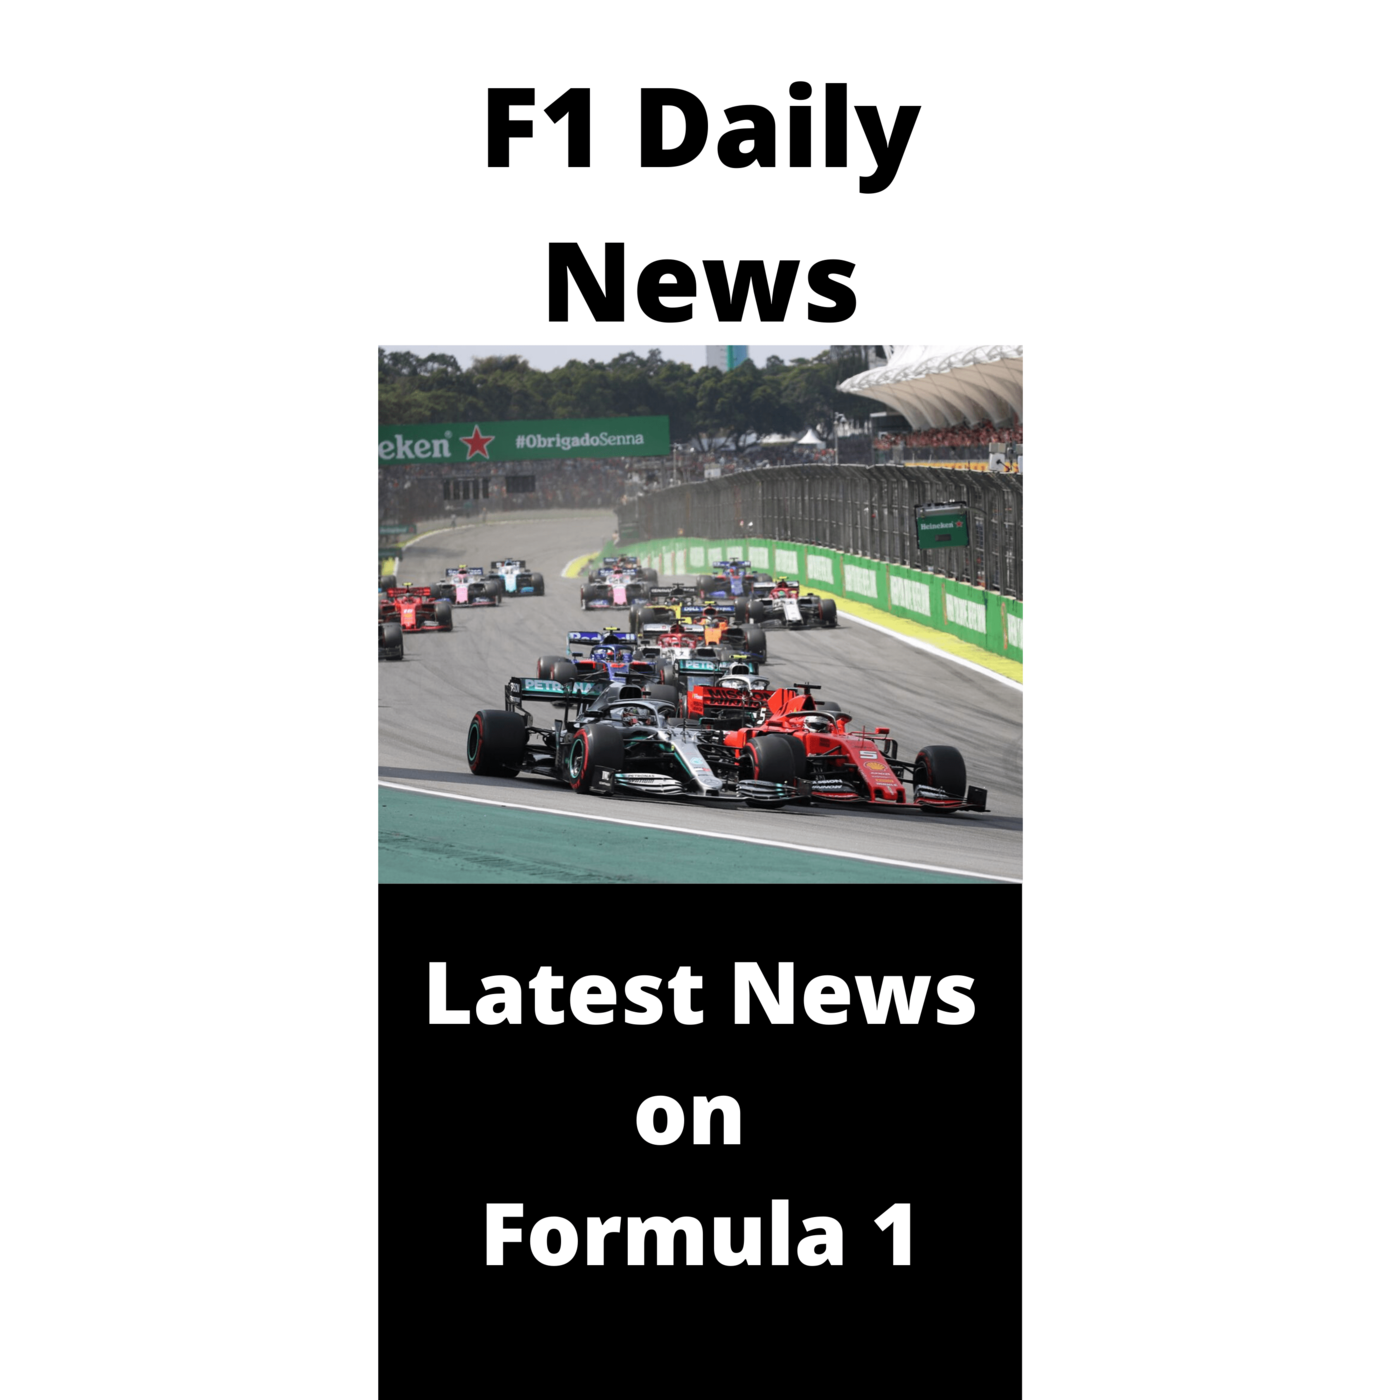 F1 Daily News